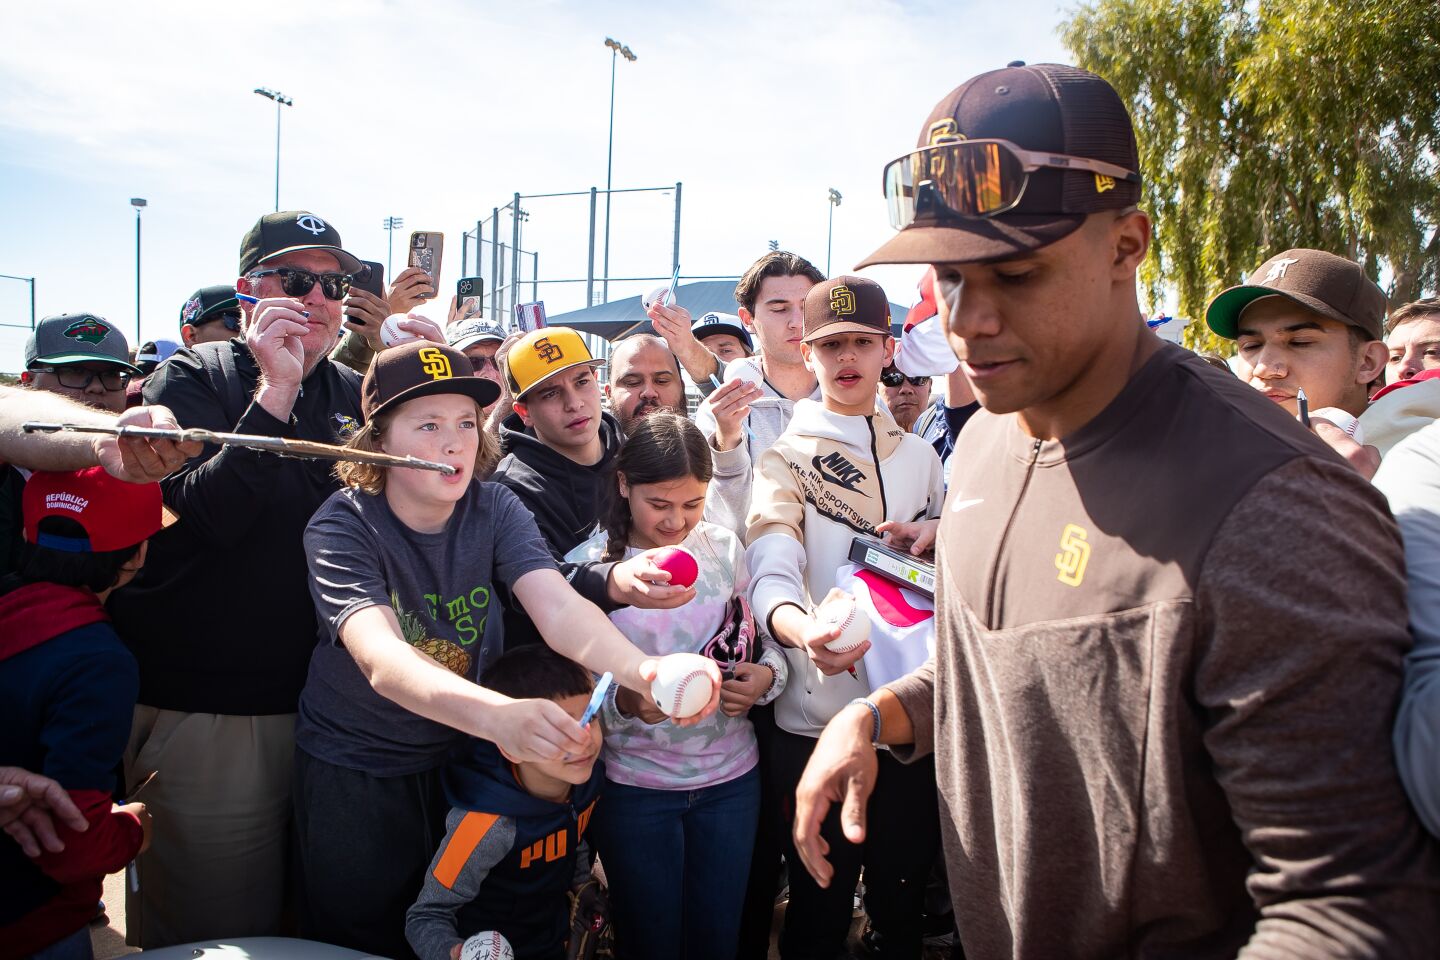 Fans beg Padres right fielder Juan Soto for autographs during a spring training practice at the Peoria Sports Complex.